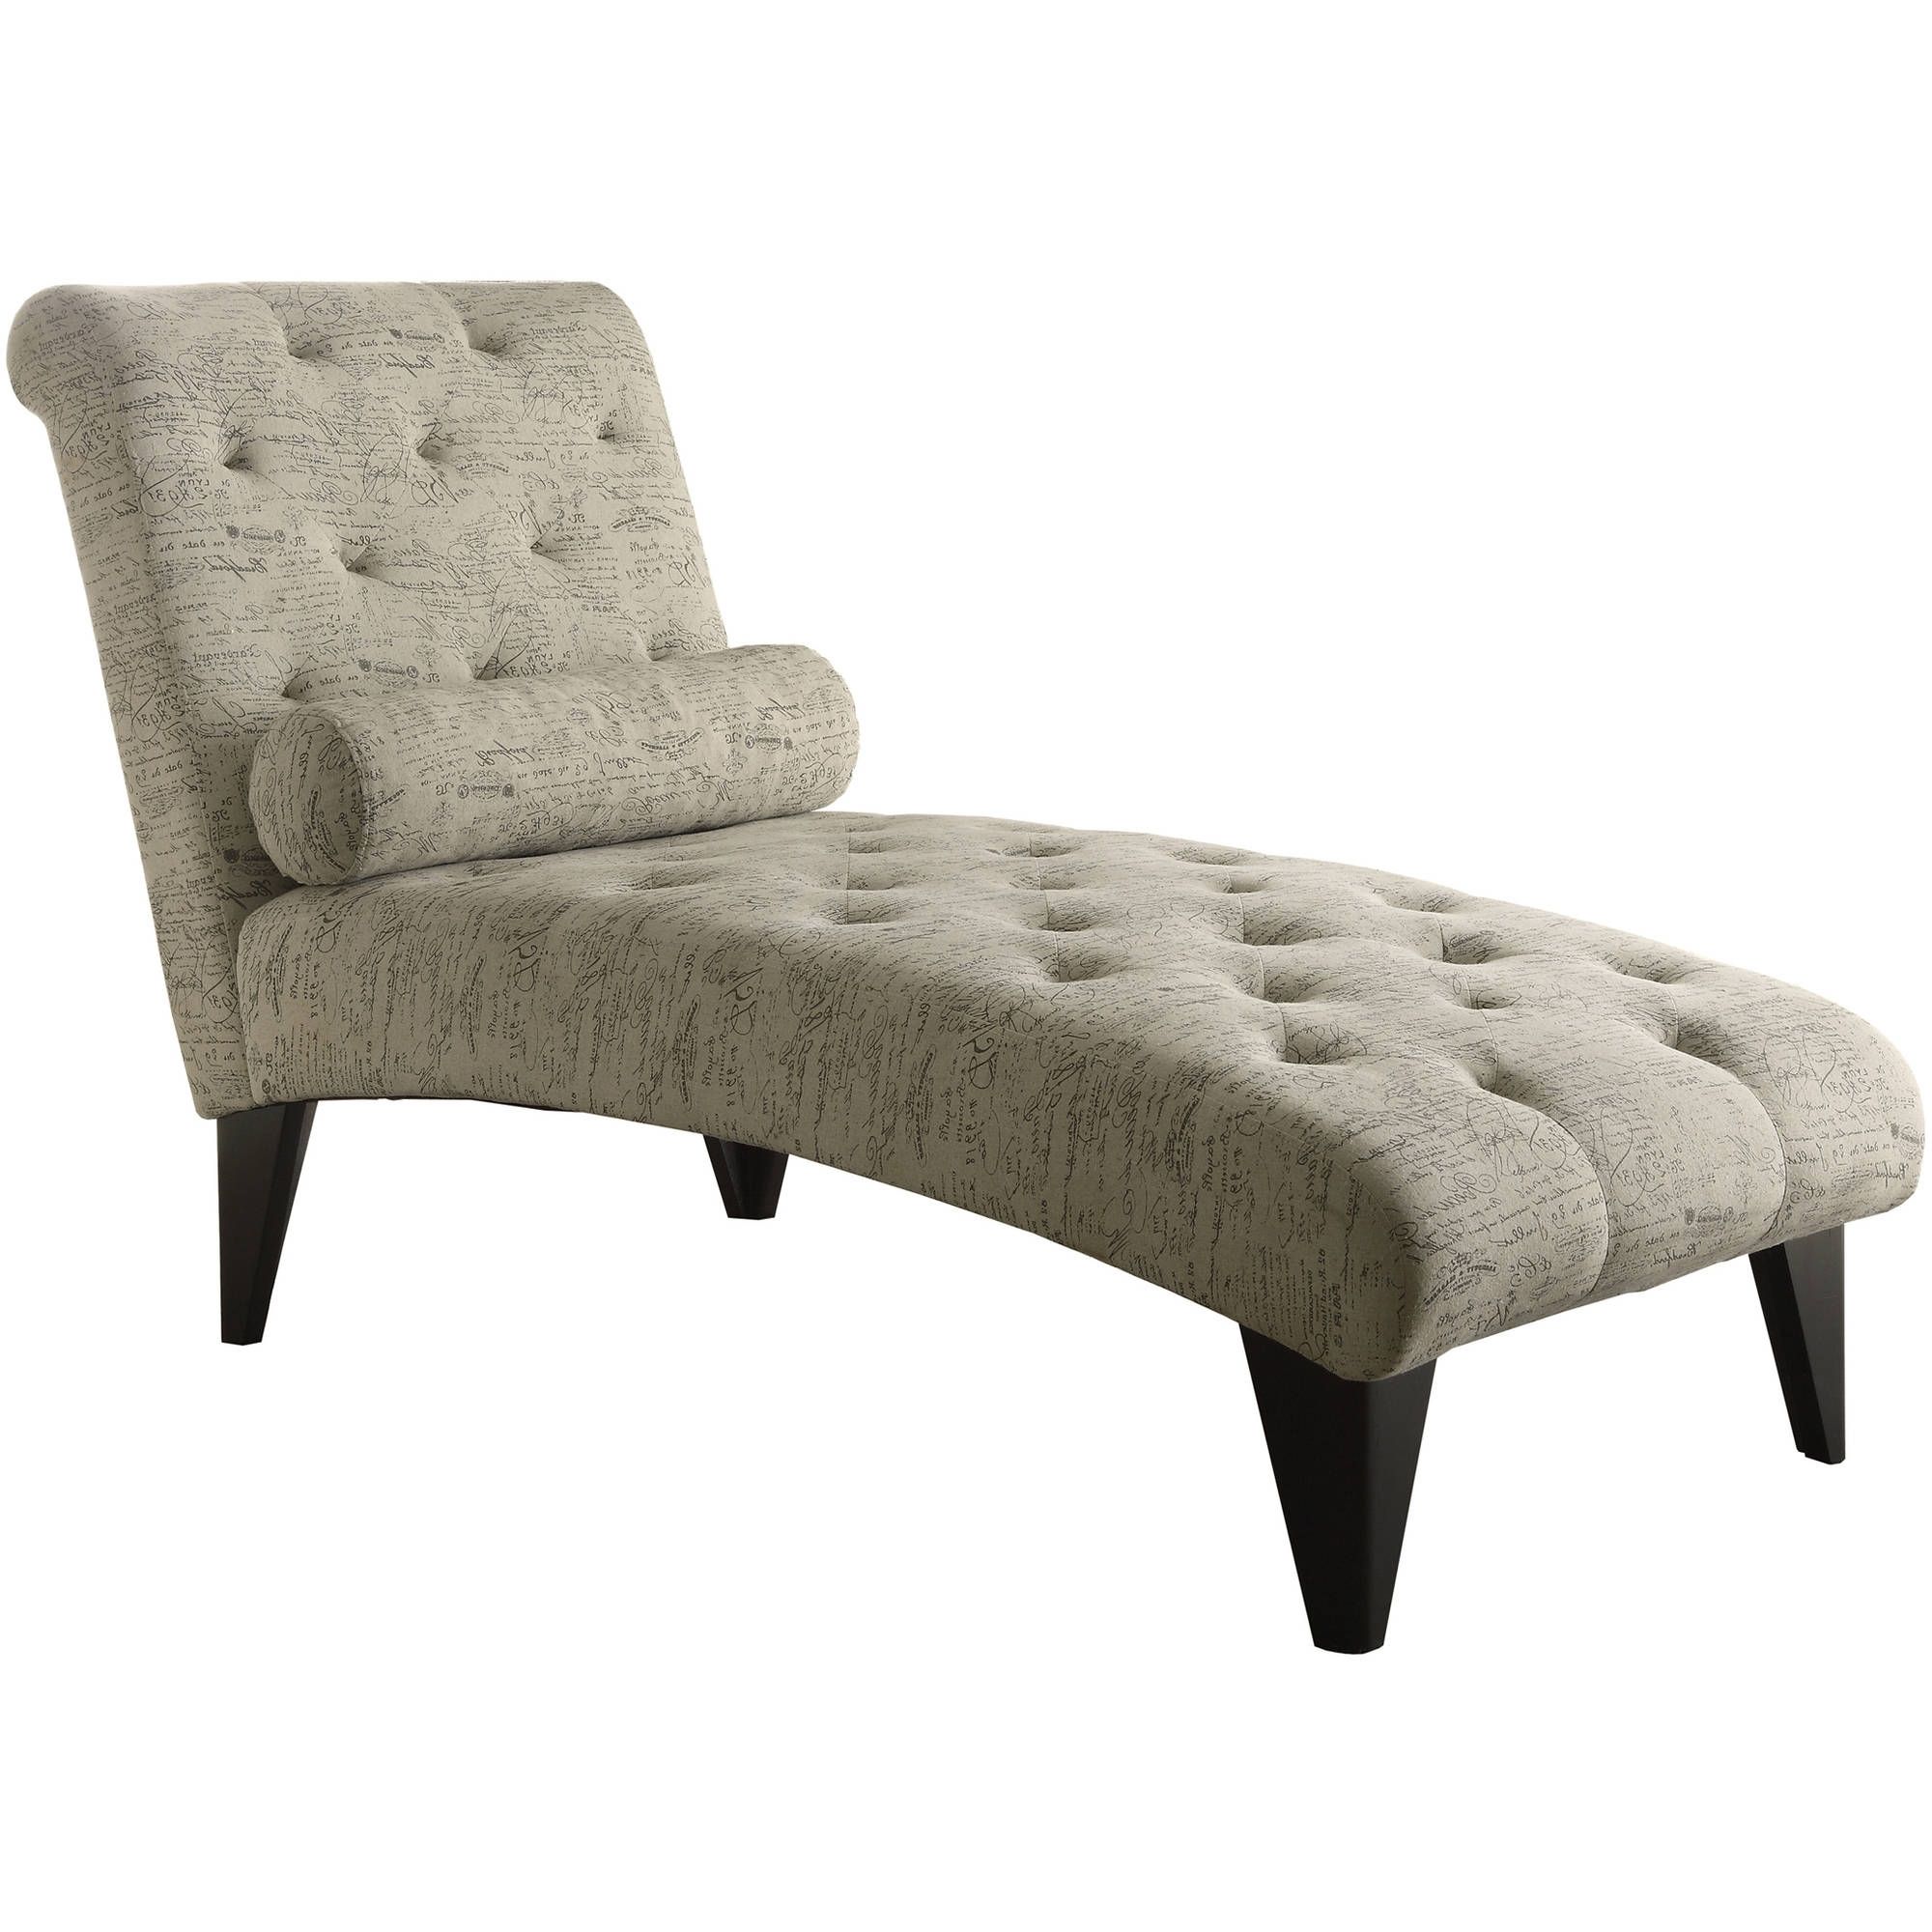 Big Lots Chaise Lounges Throughout Current Chaise Lounges – Walmart (View 2 of 15)